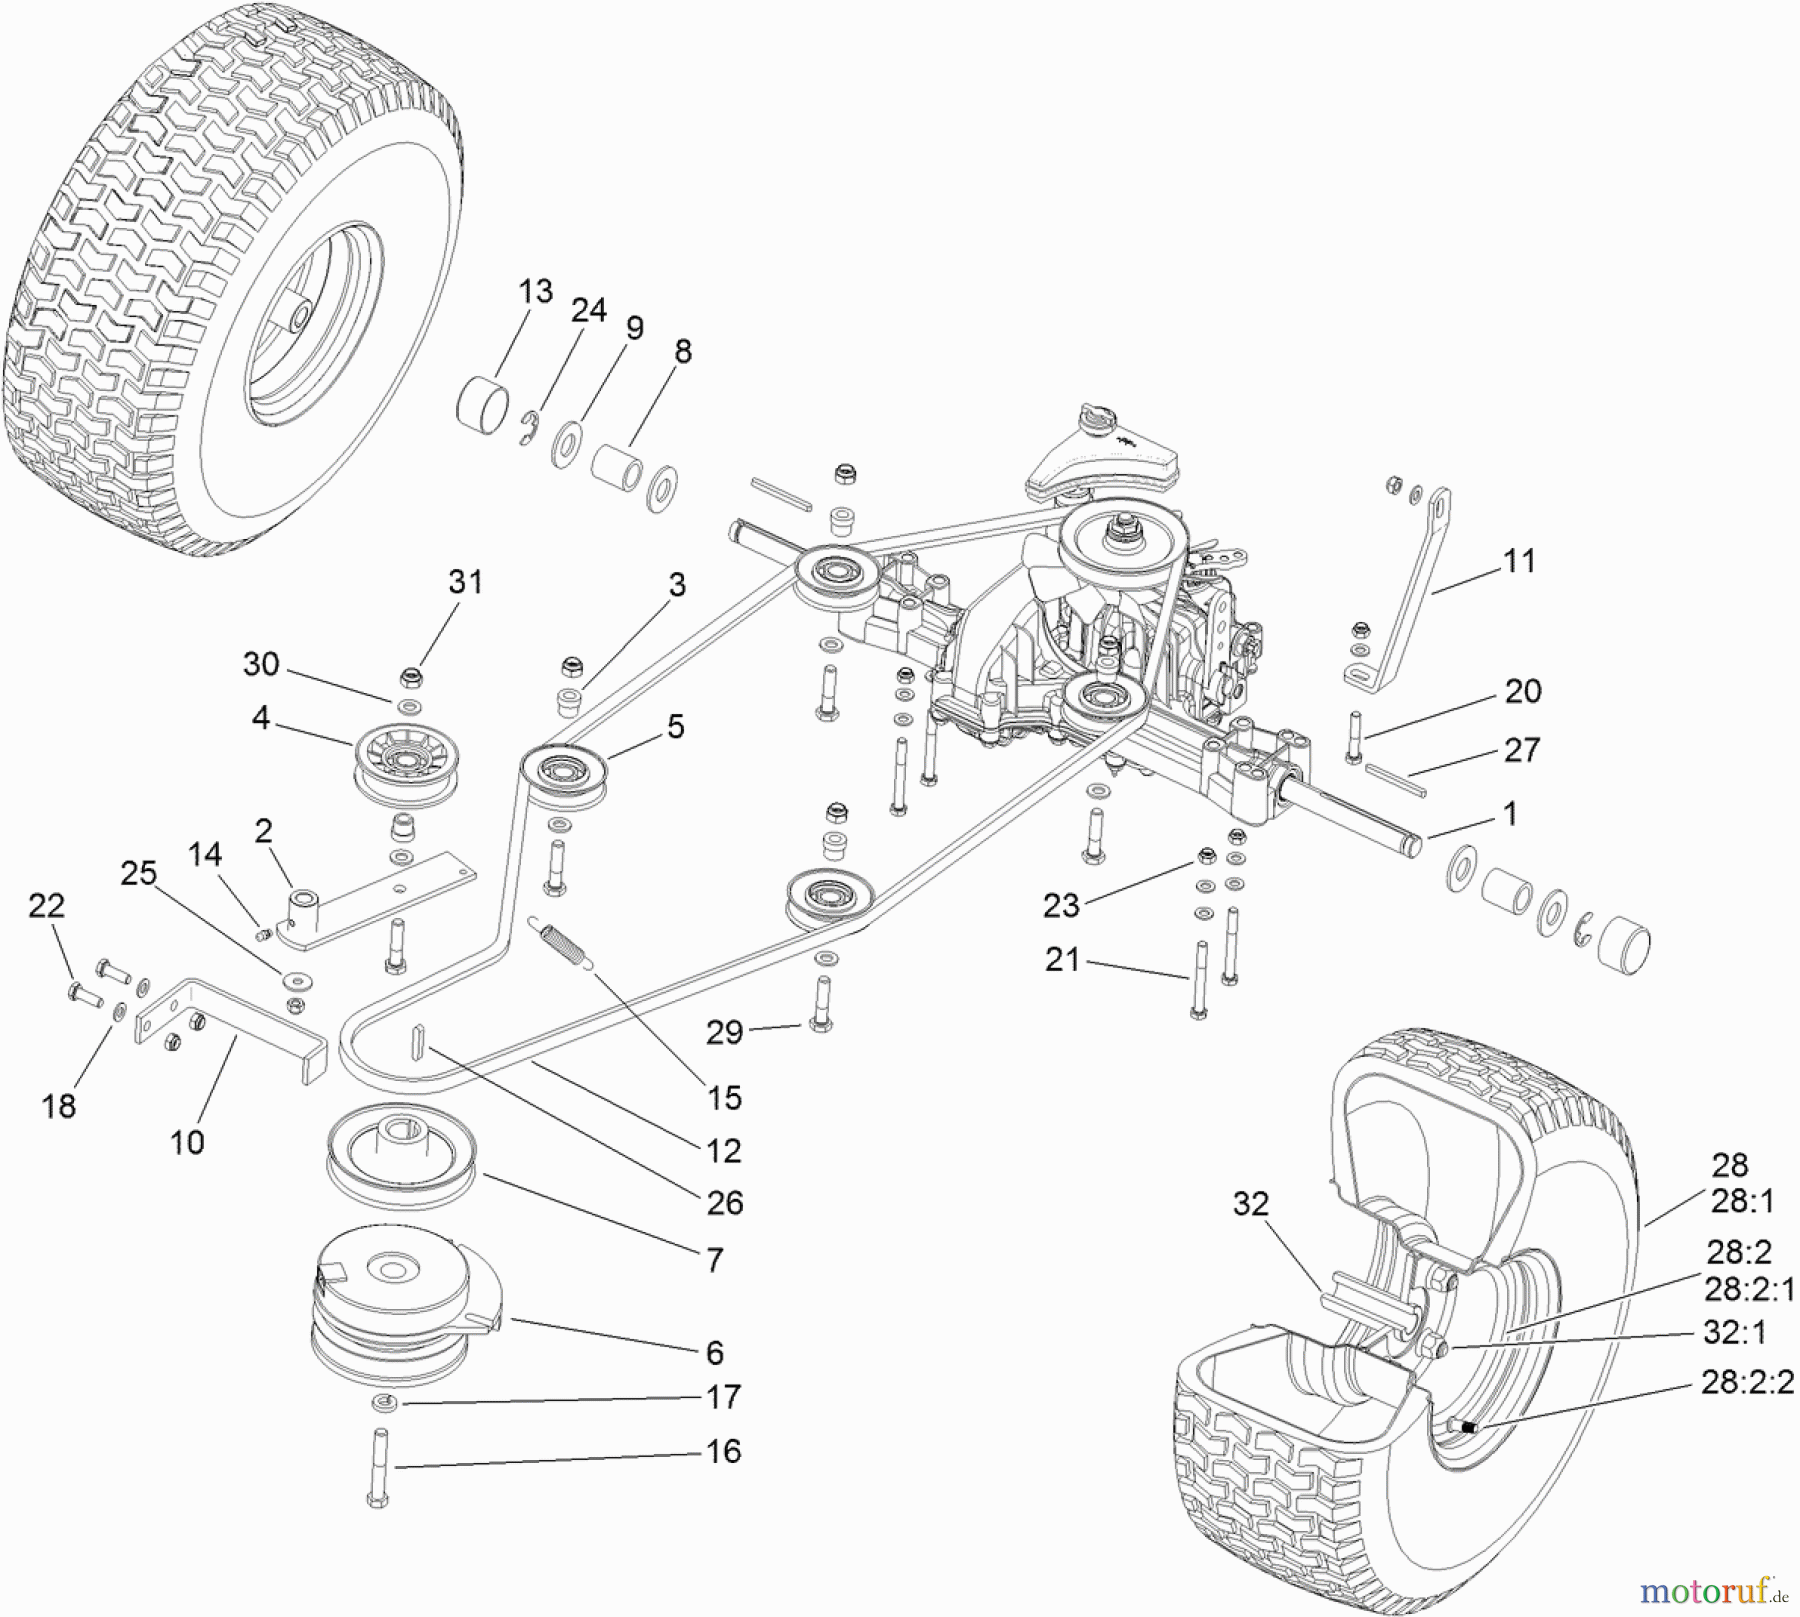  Toro Neu Mowers, Lawn & Garden Tractor Seite 1 74596 (DH 220) - Toro DH 220 Lawn Tractor, 2012 (SN 312000001-312999999) TRANSMISSION DRIVE ASSEMBLY